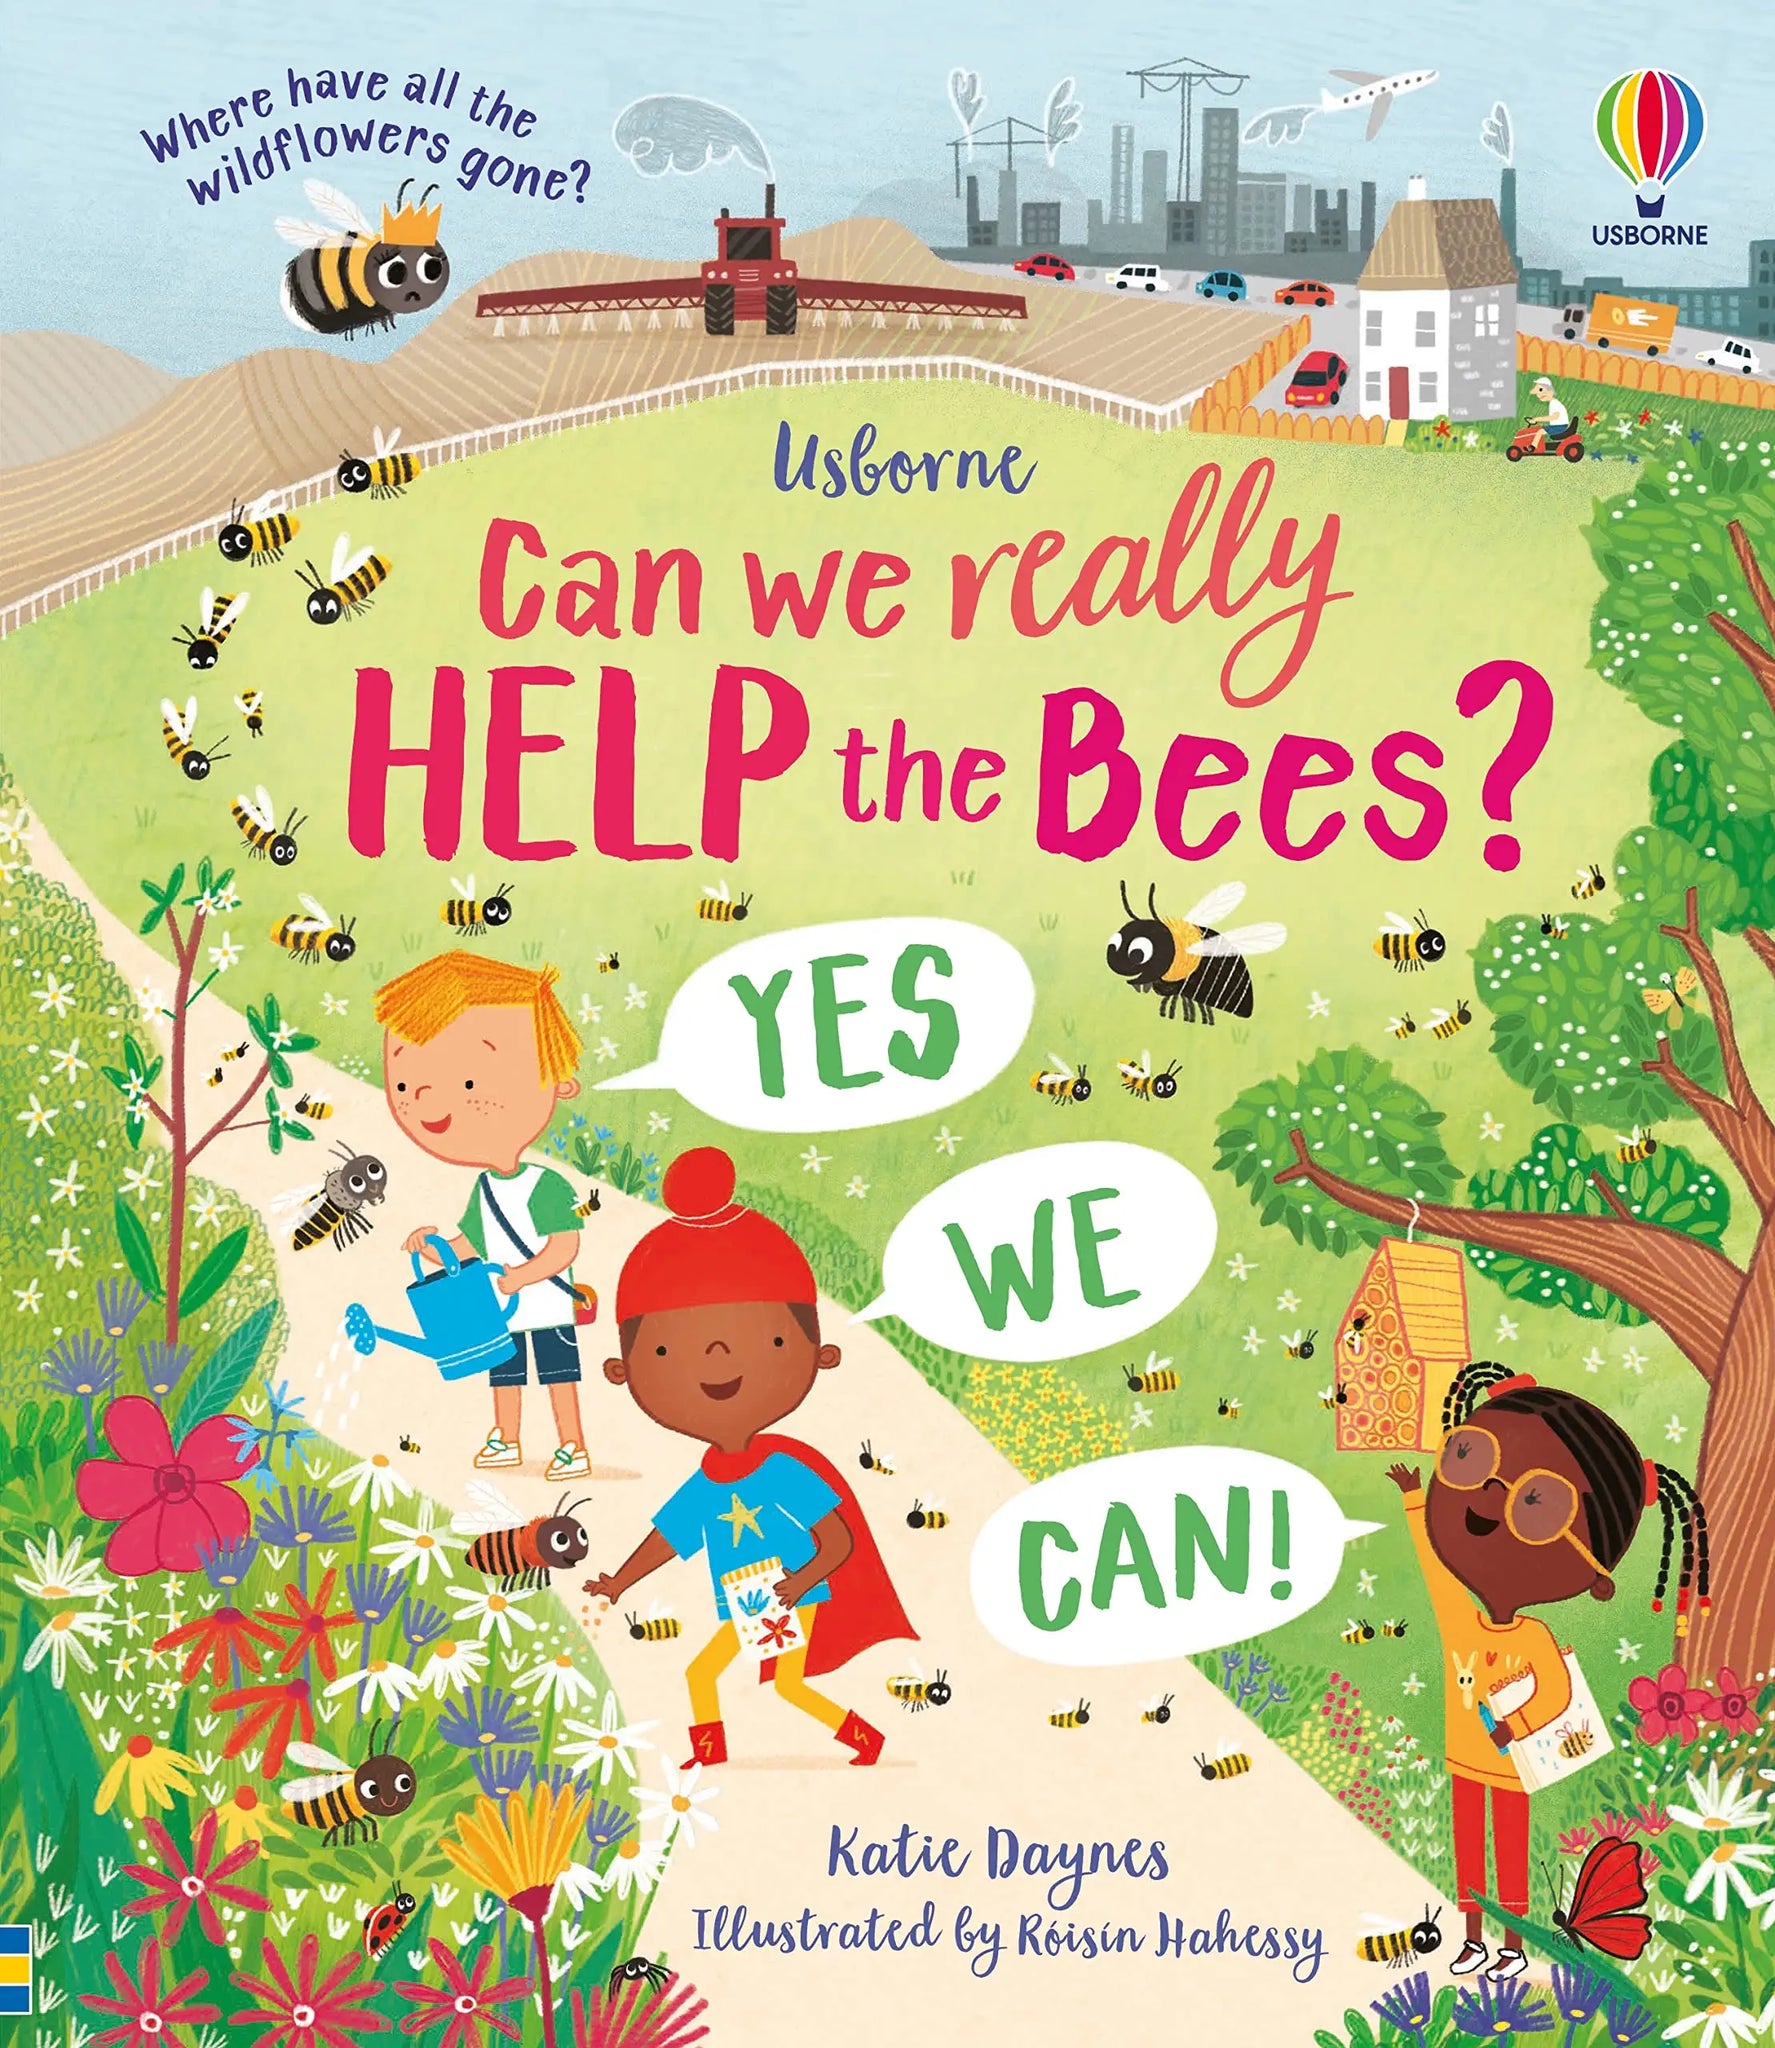 Usborne Can we really Help the Bees?